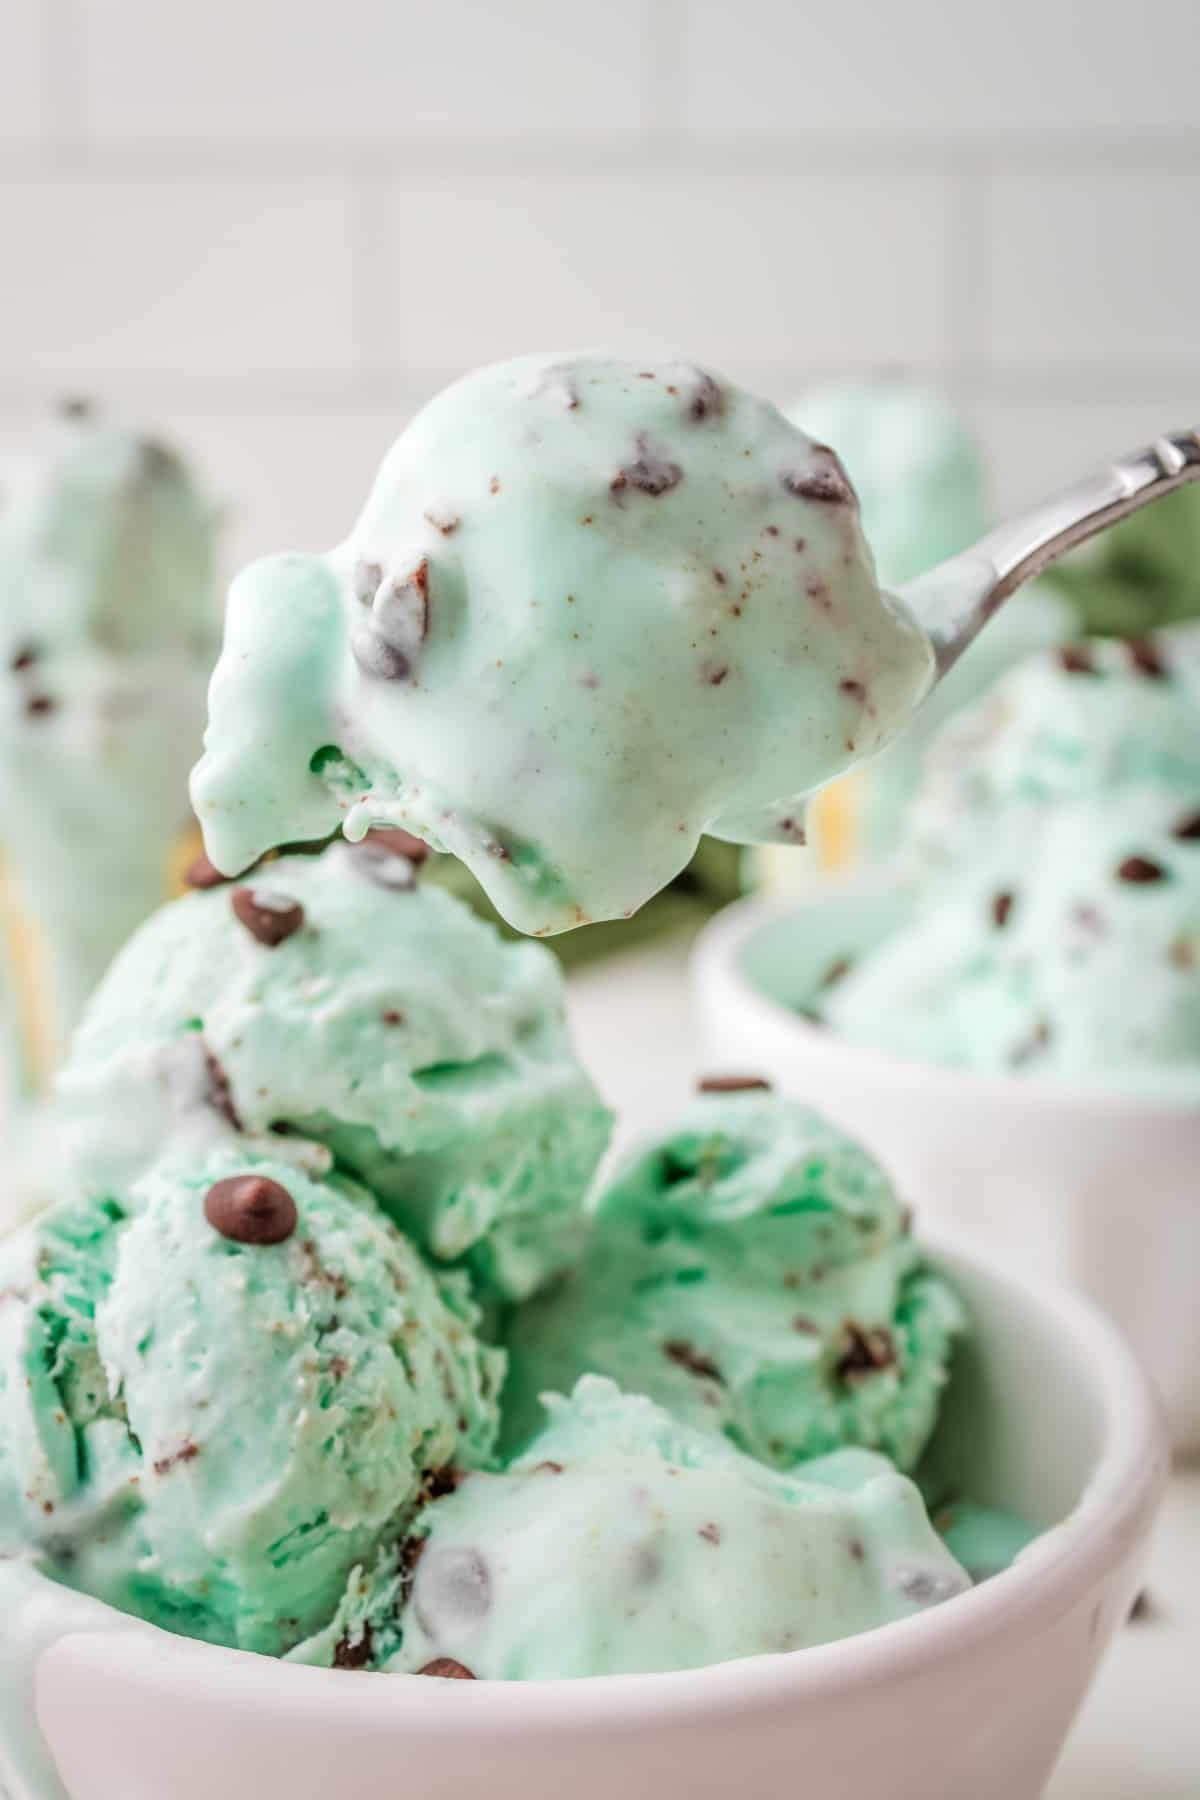 Green no-churn ice cream being spooned out of a white bowl.